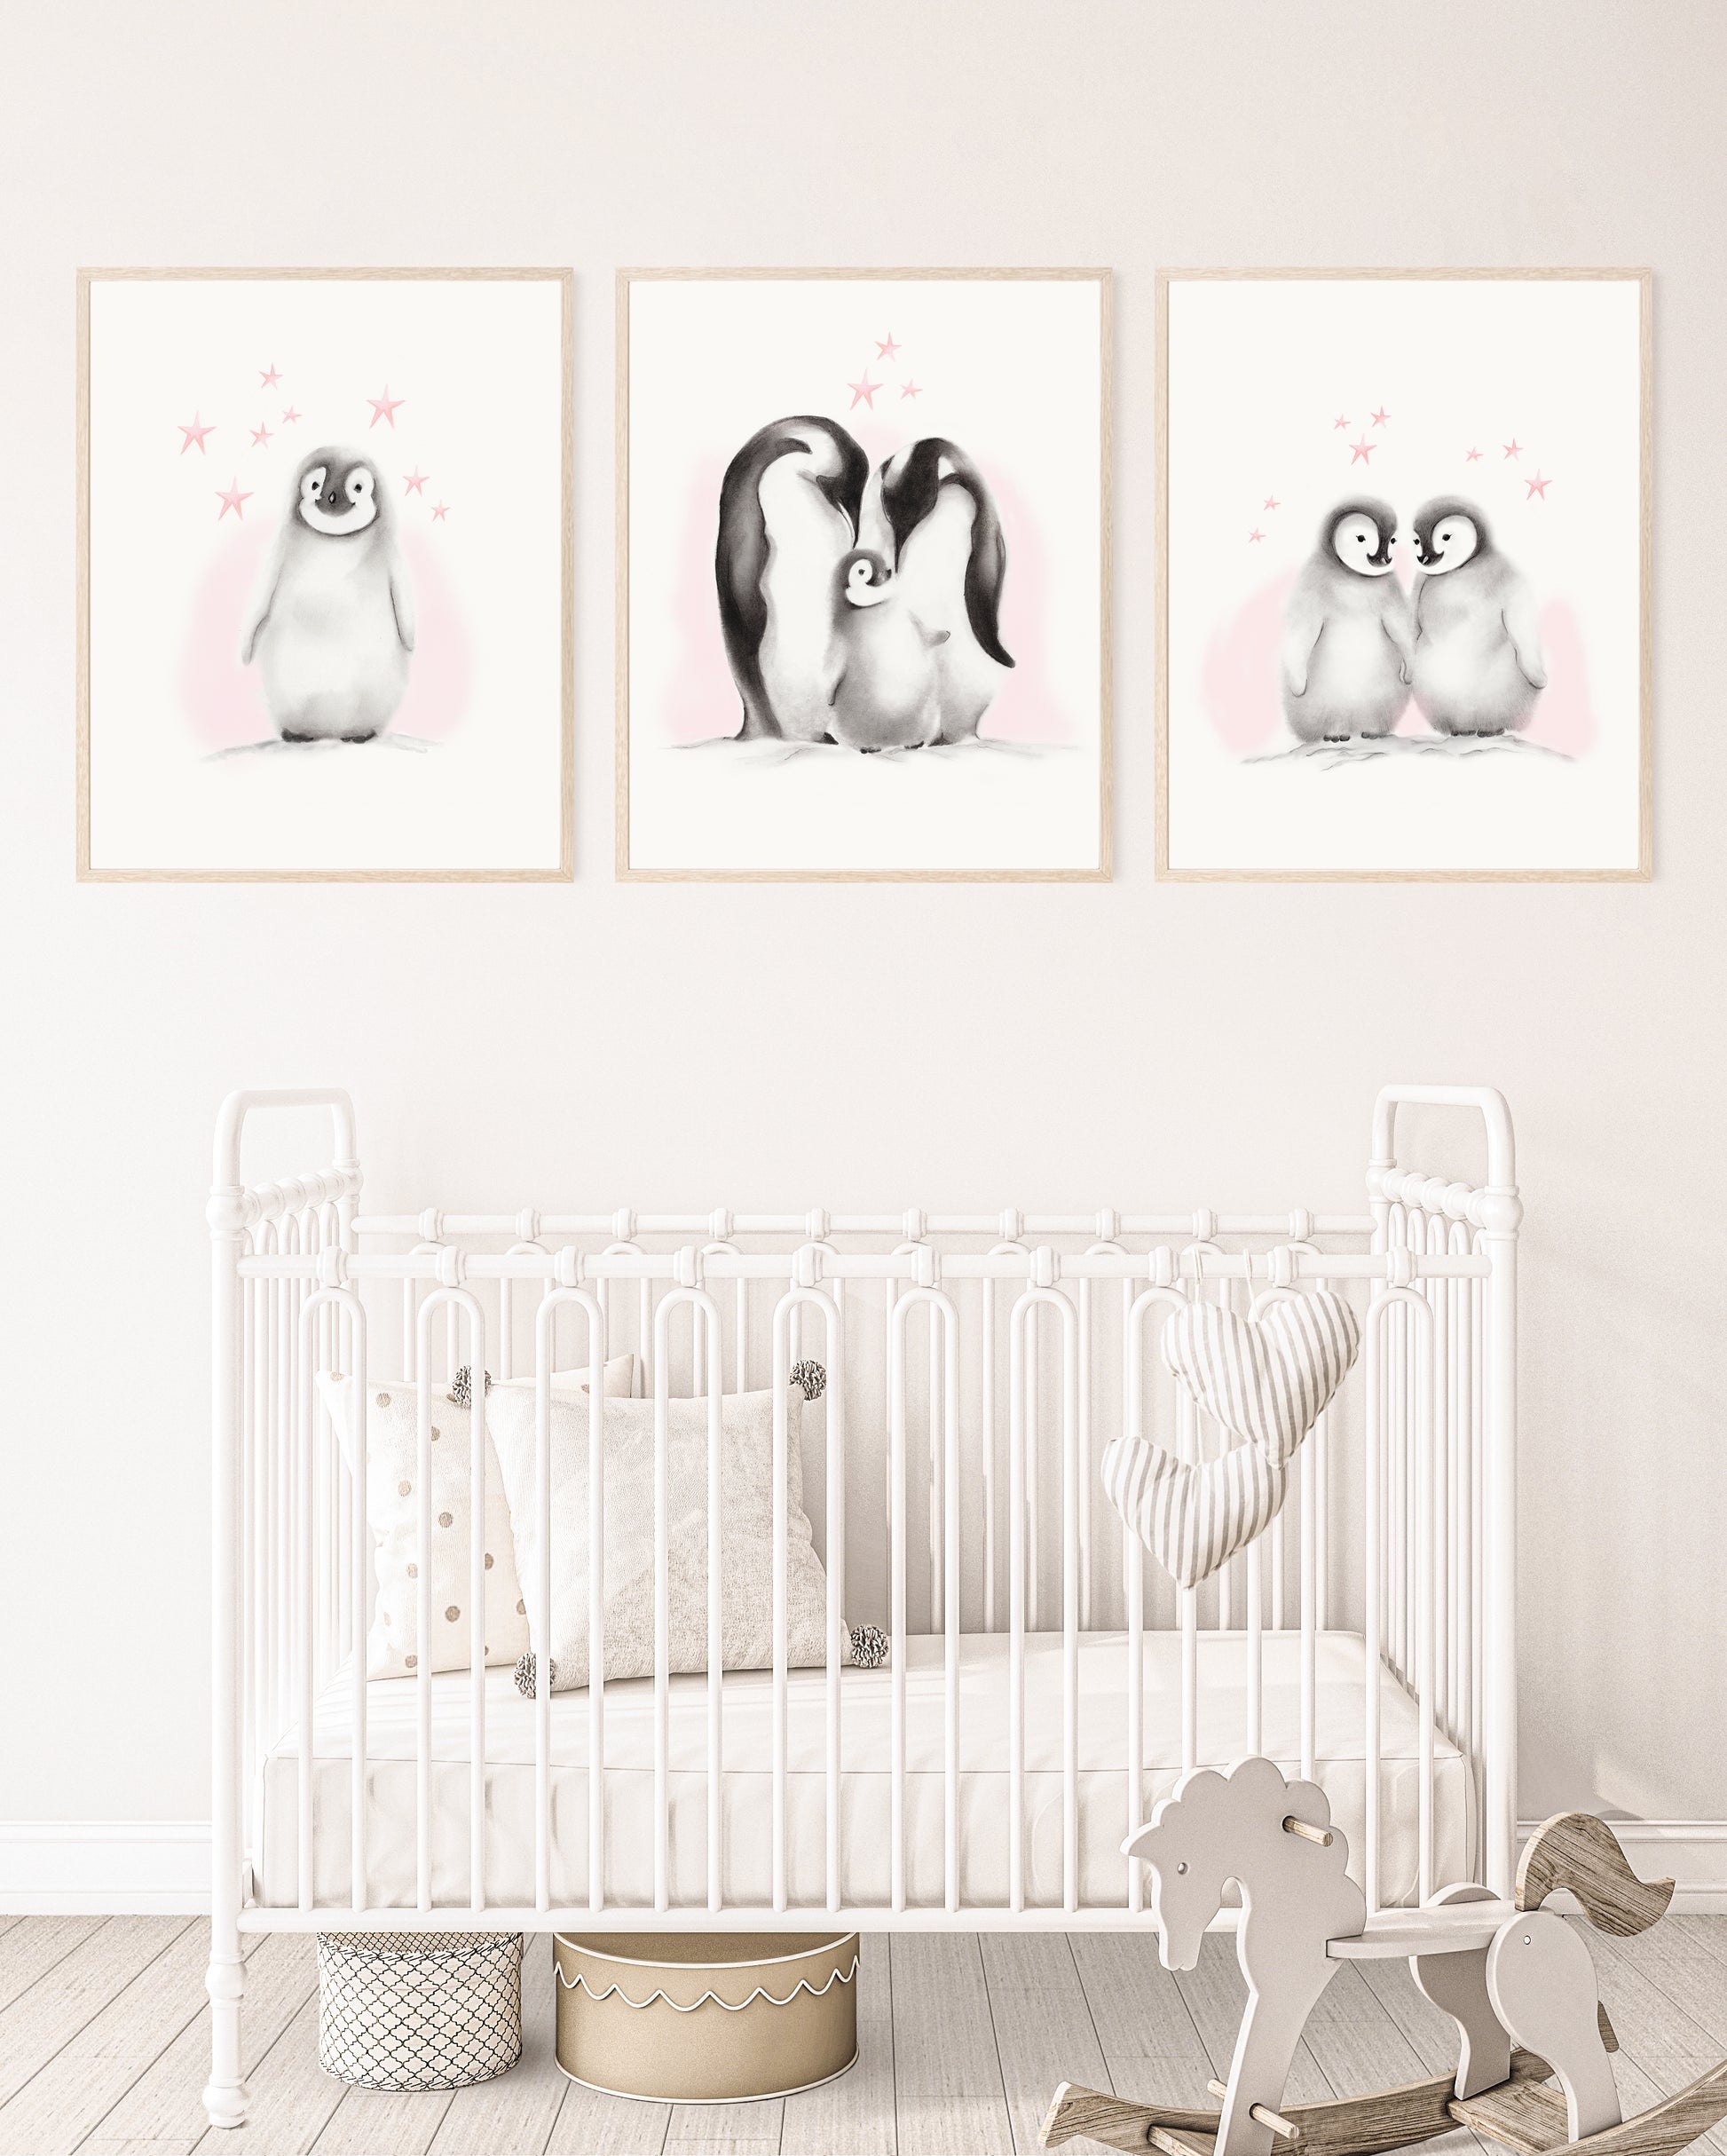 Set of 3 Penguins with Pink Accents Nursery Prints for Baby  by Studio Q  - Art by Nicky Quartermaine Scott